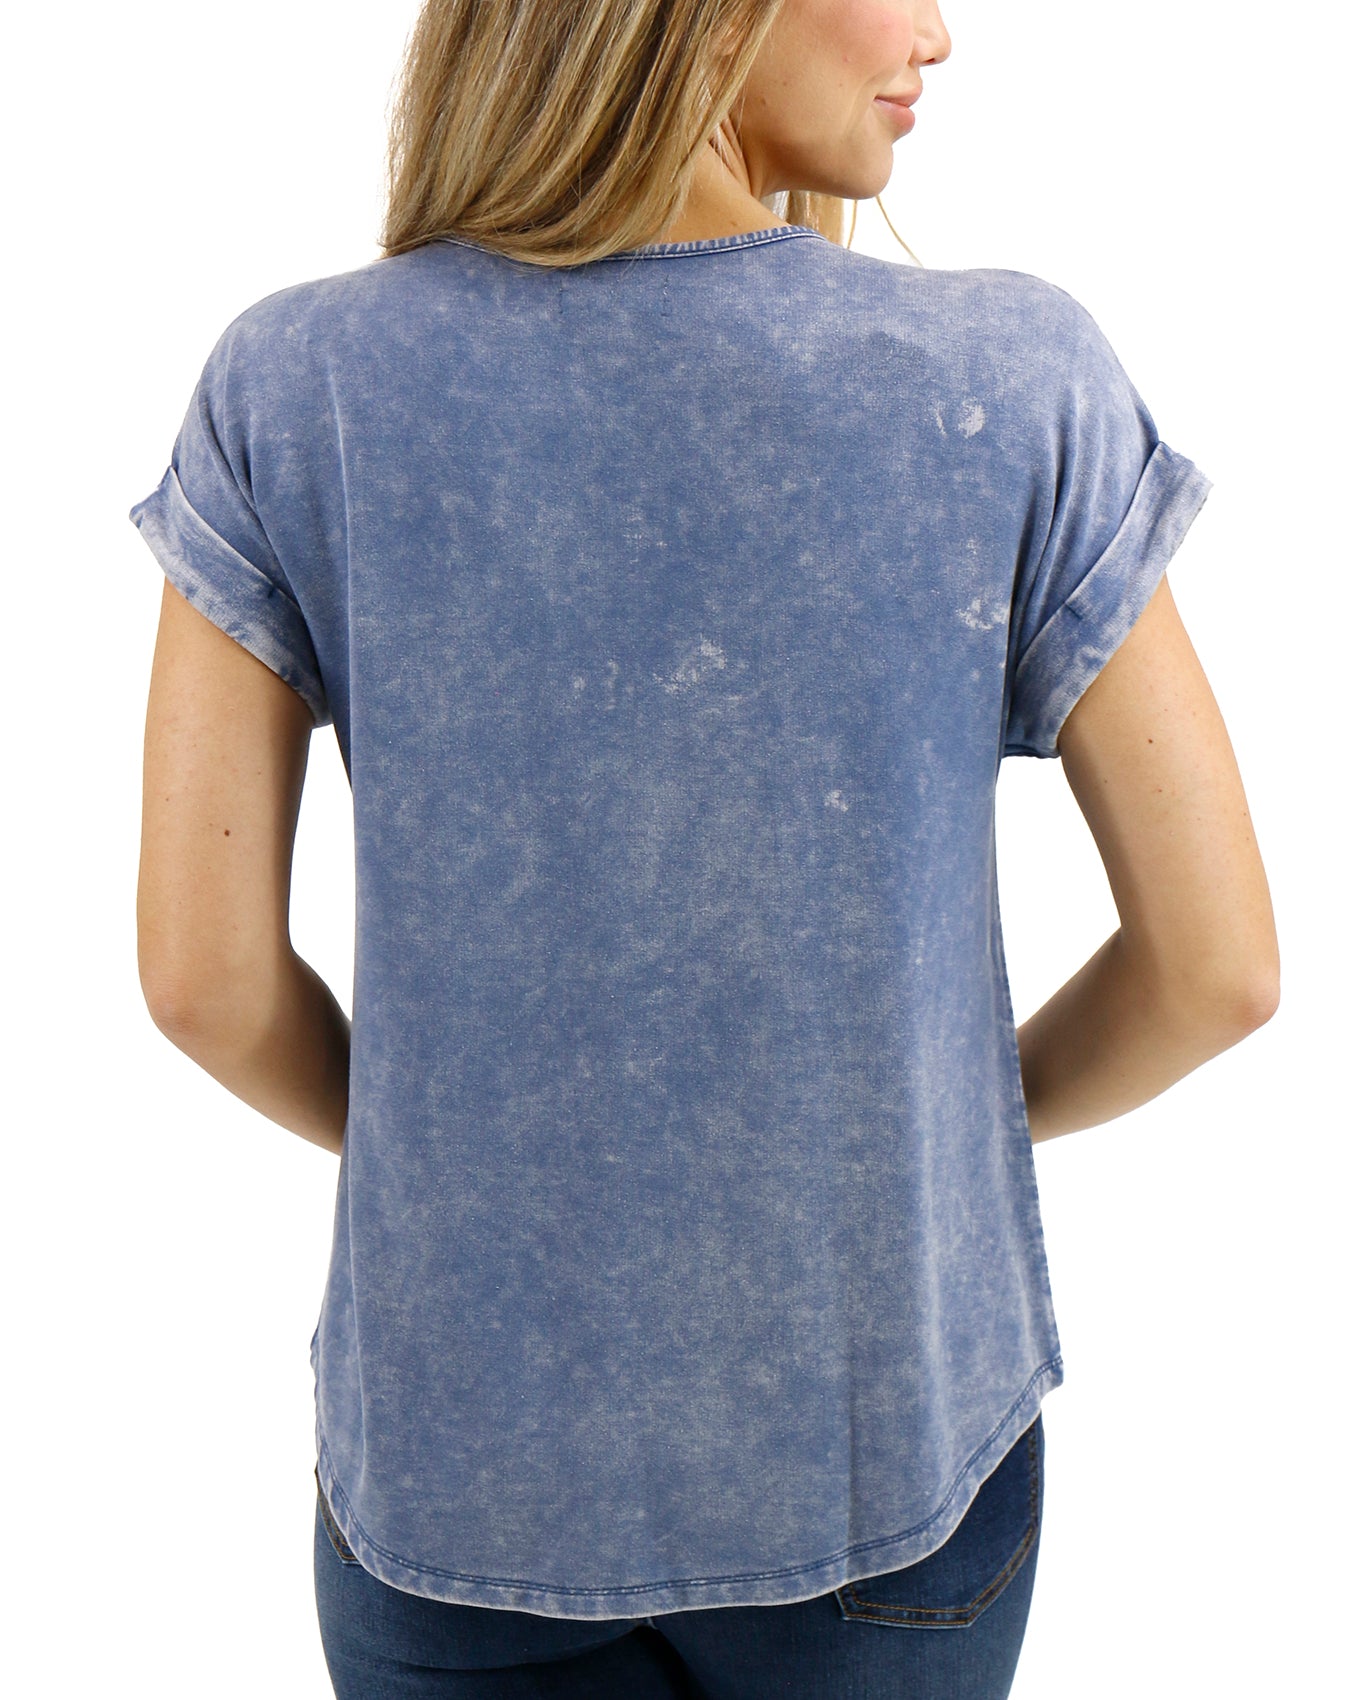 Back stock shot of Washed Navy Henley Mineral Washed Tee